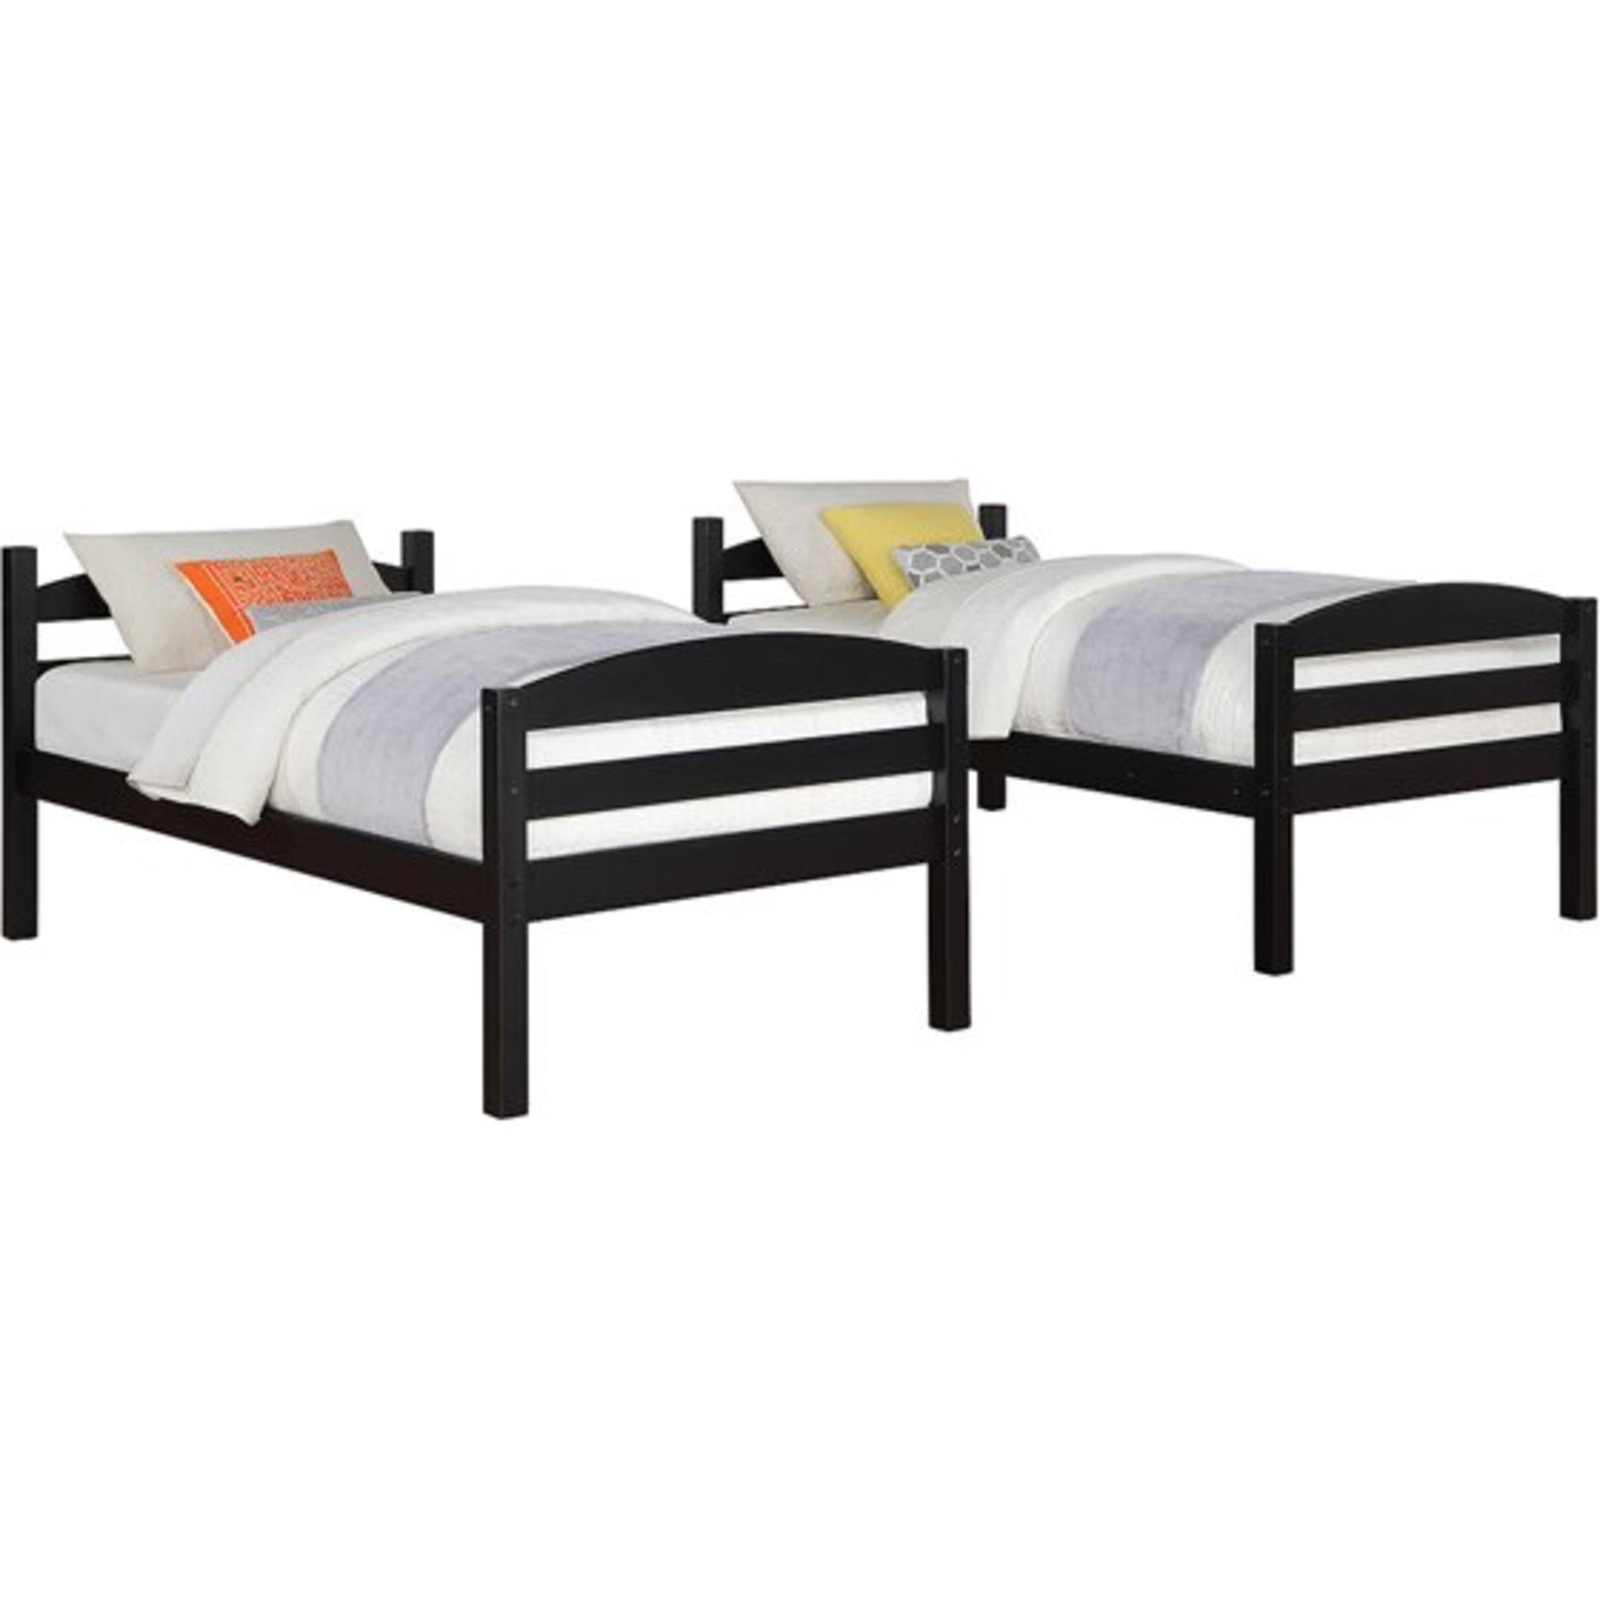 better homes and gardens leighton twin bed